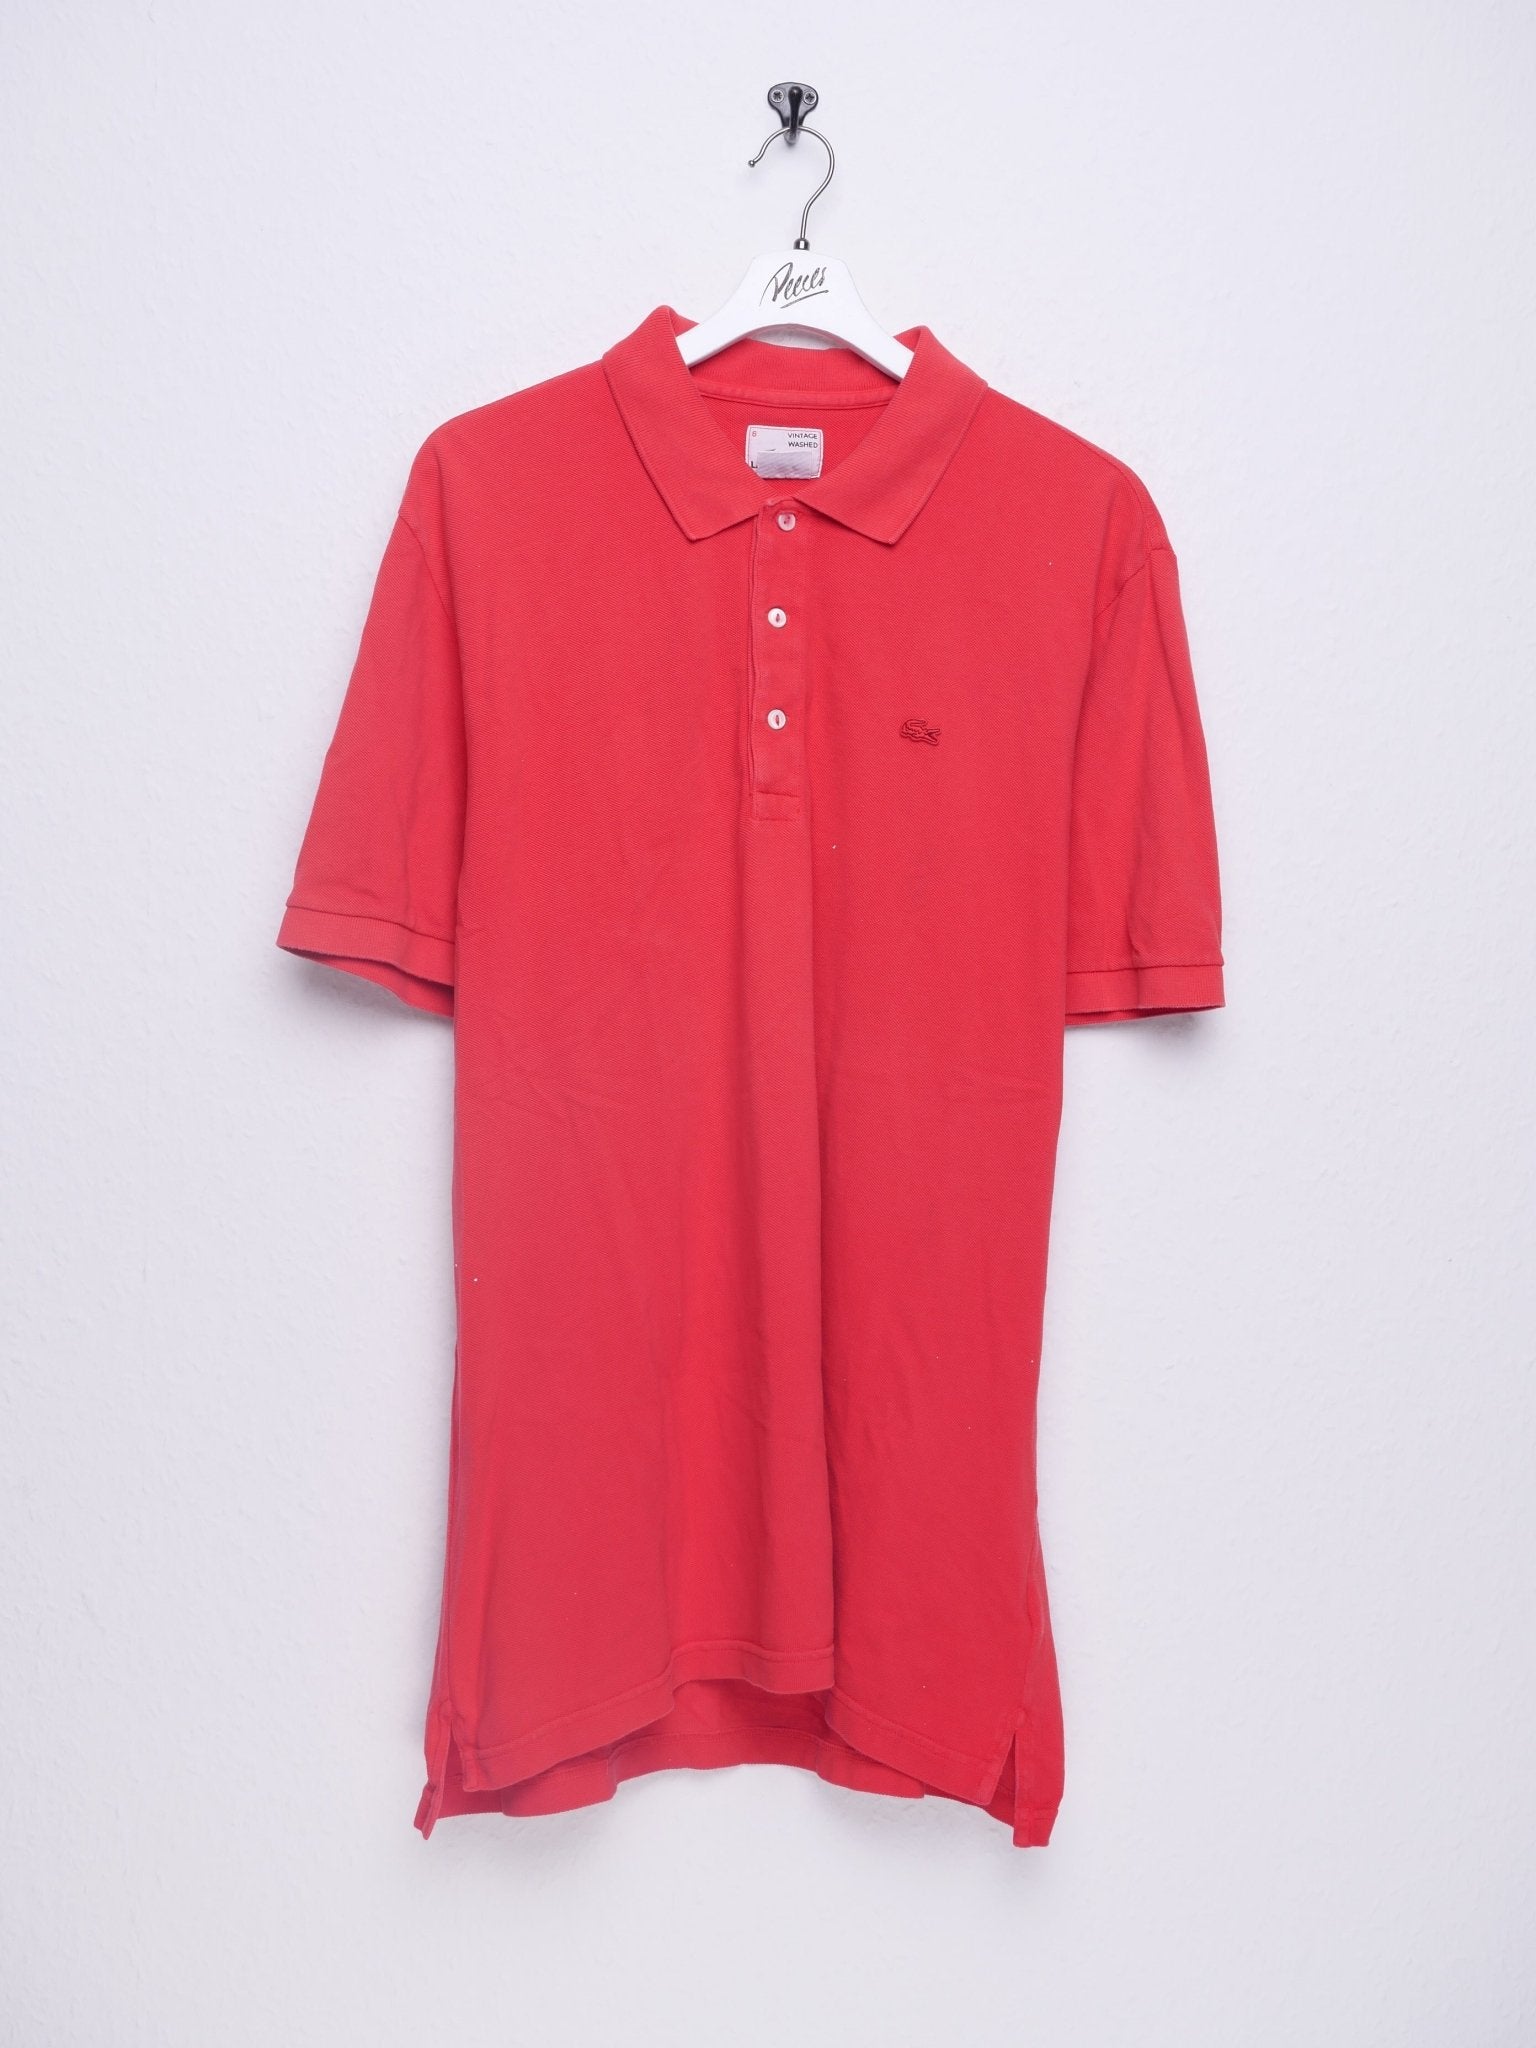 lacoste embroidered Logo red Polo Shirt - Peeces